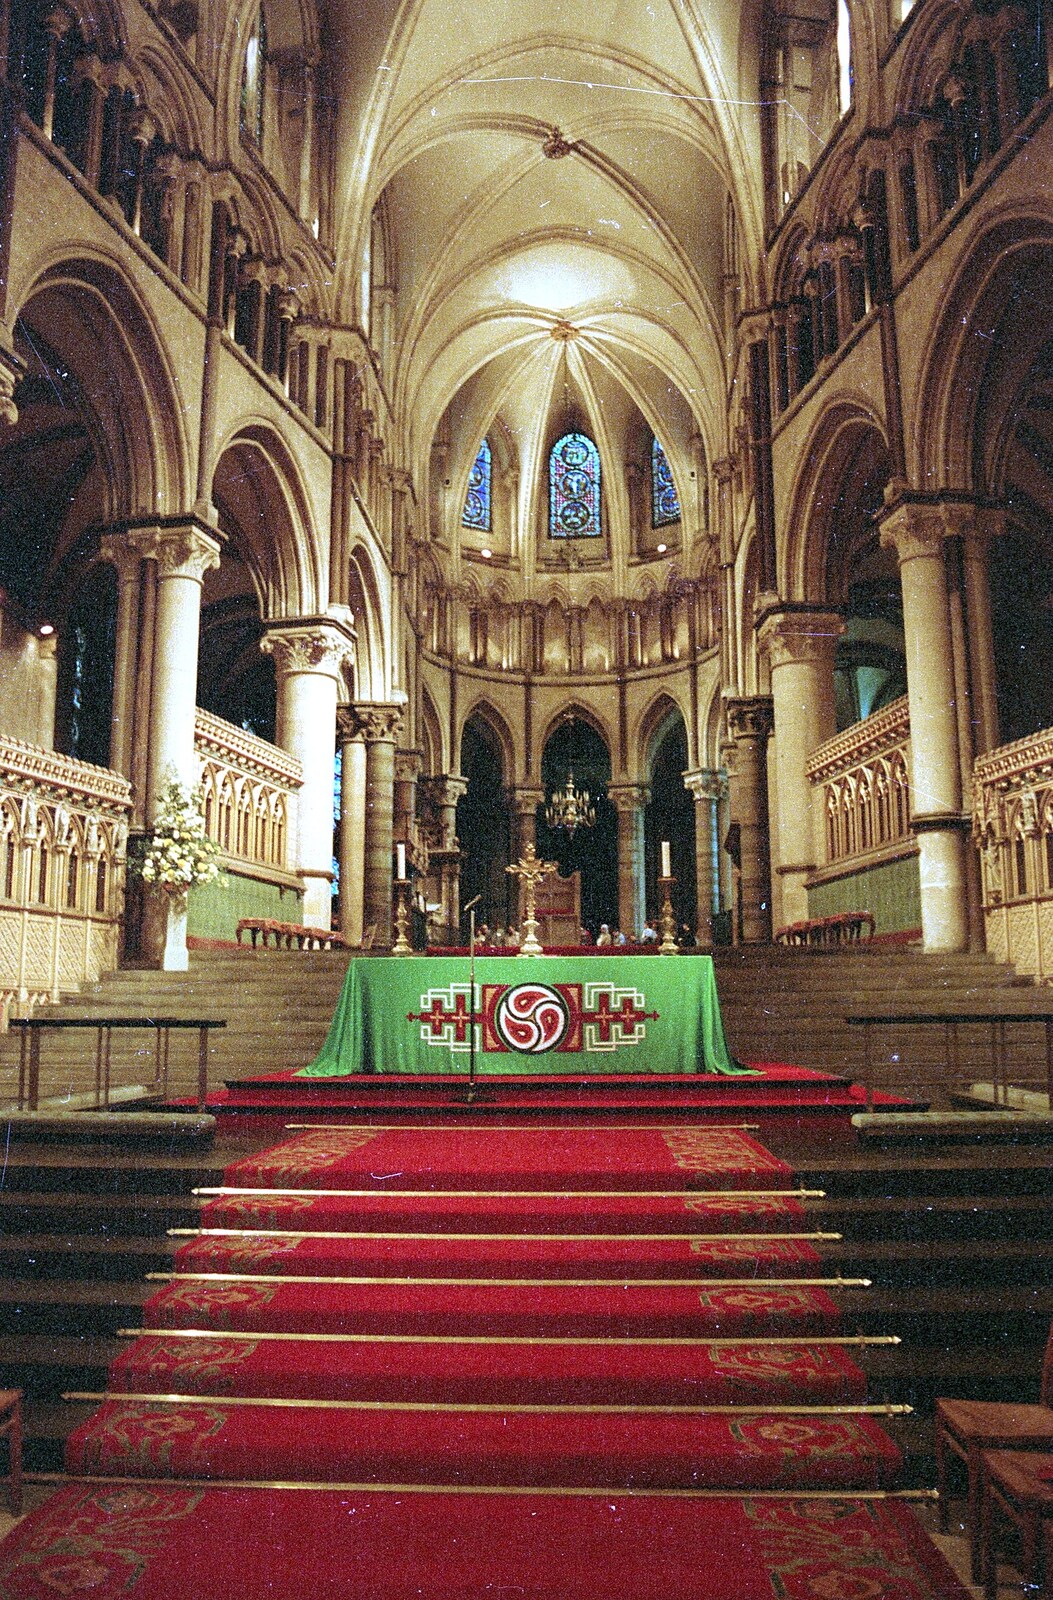 The altar of Canterbury Cathedral from Network Day with Hamish, The South East - 21st June 1986